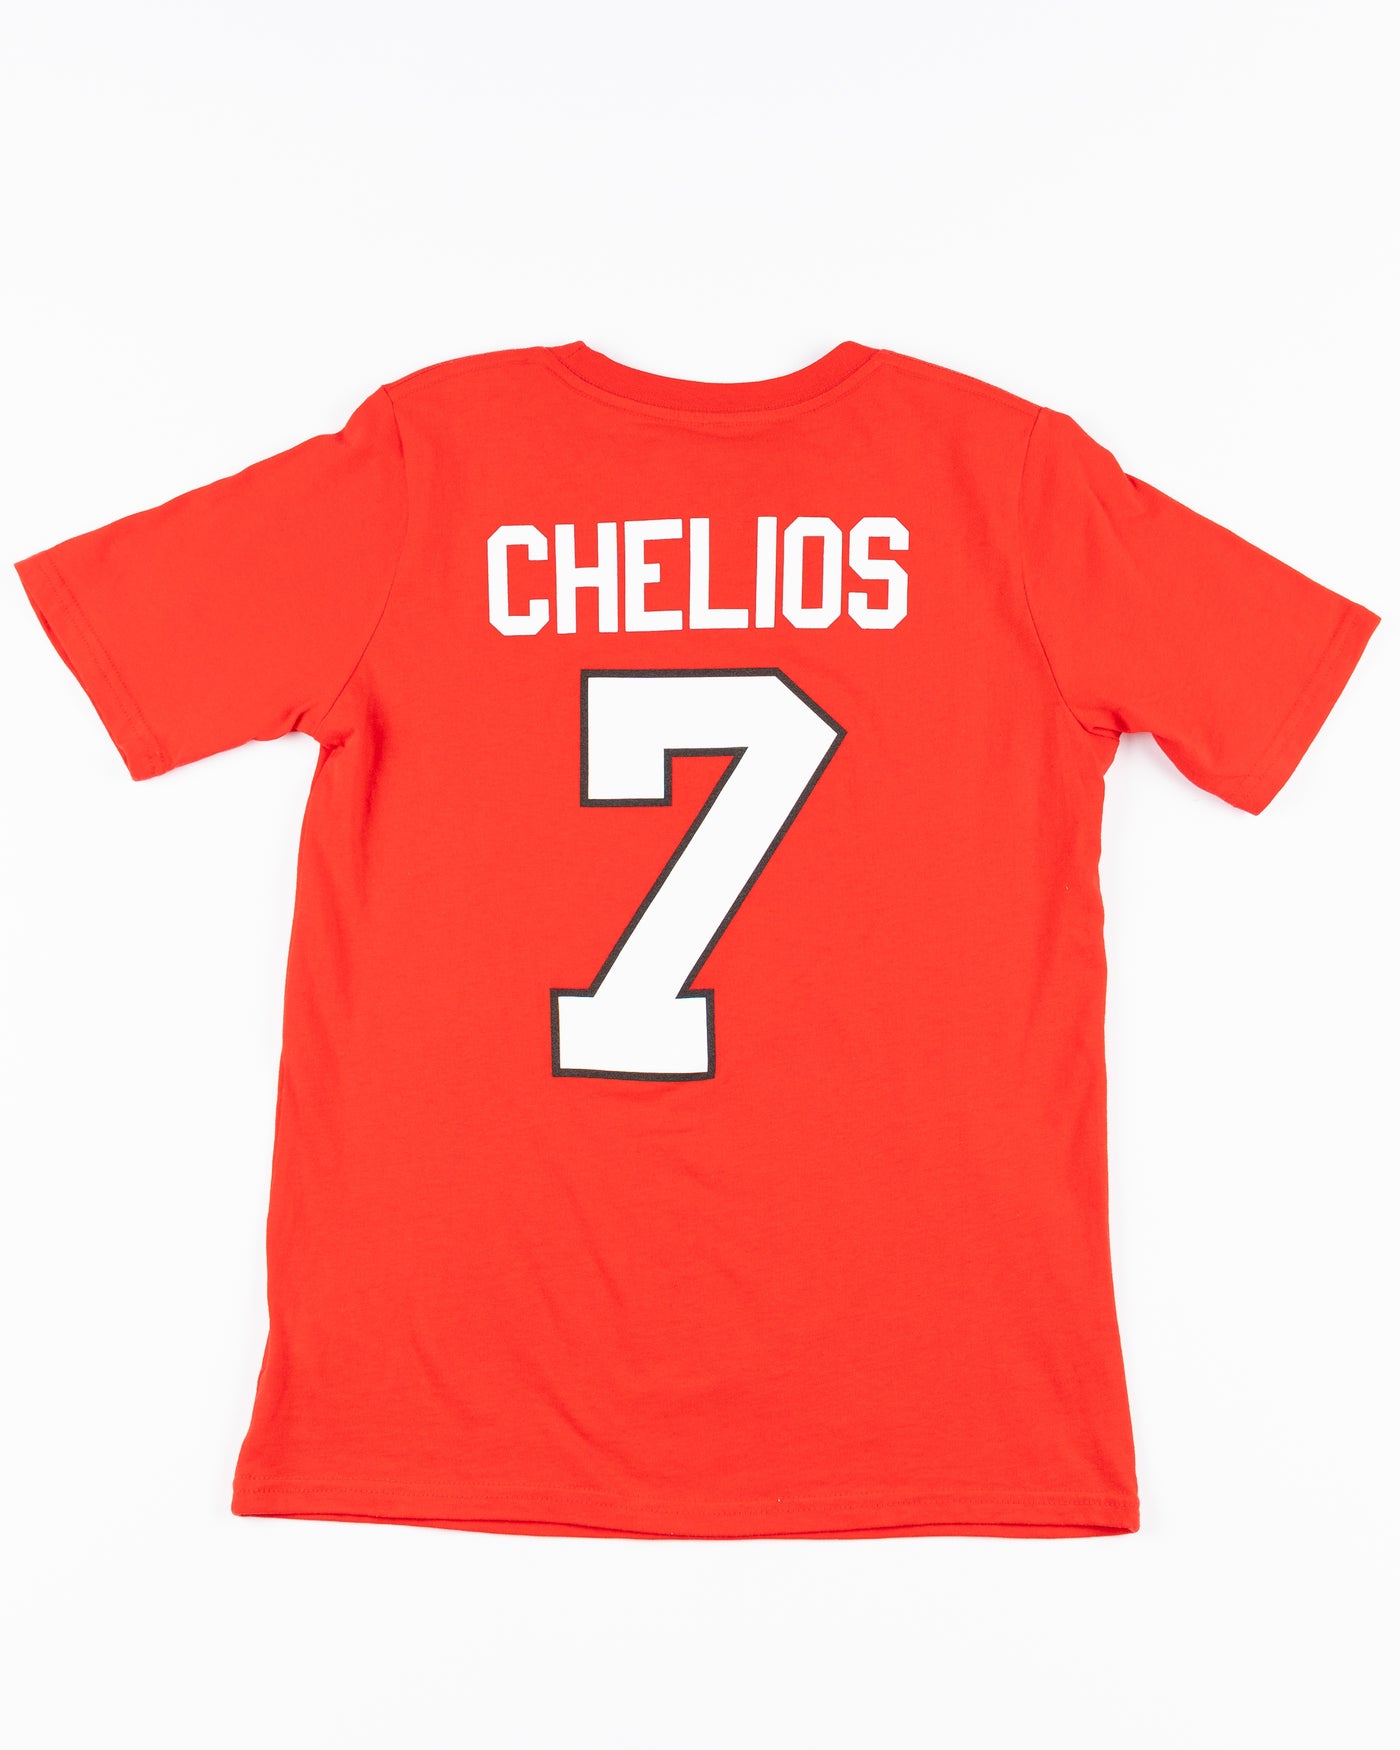 red youth Mitchell & Ness Chelios player tee - back lay flat